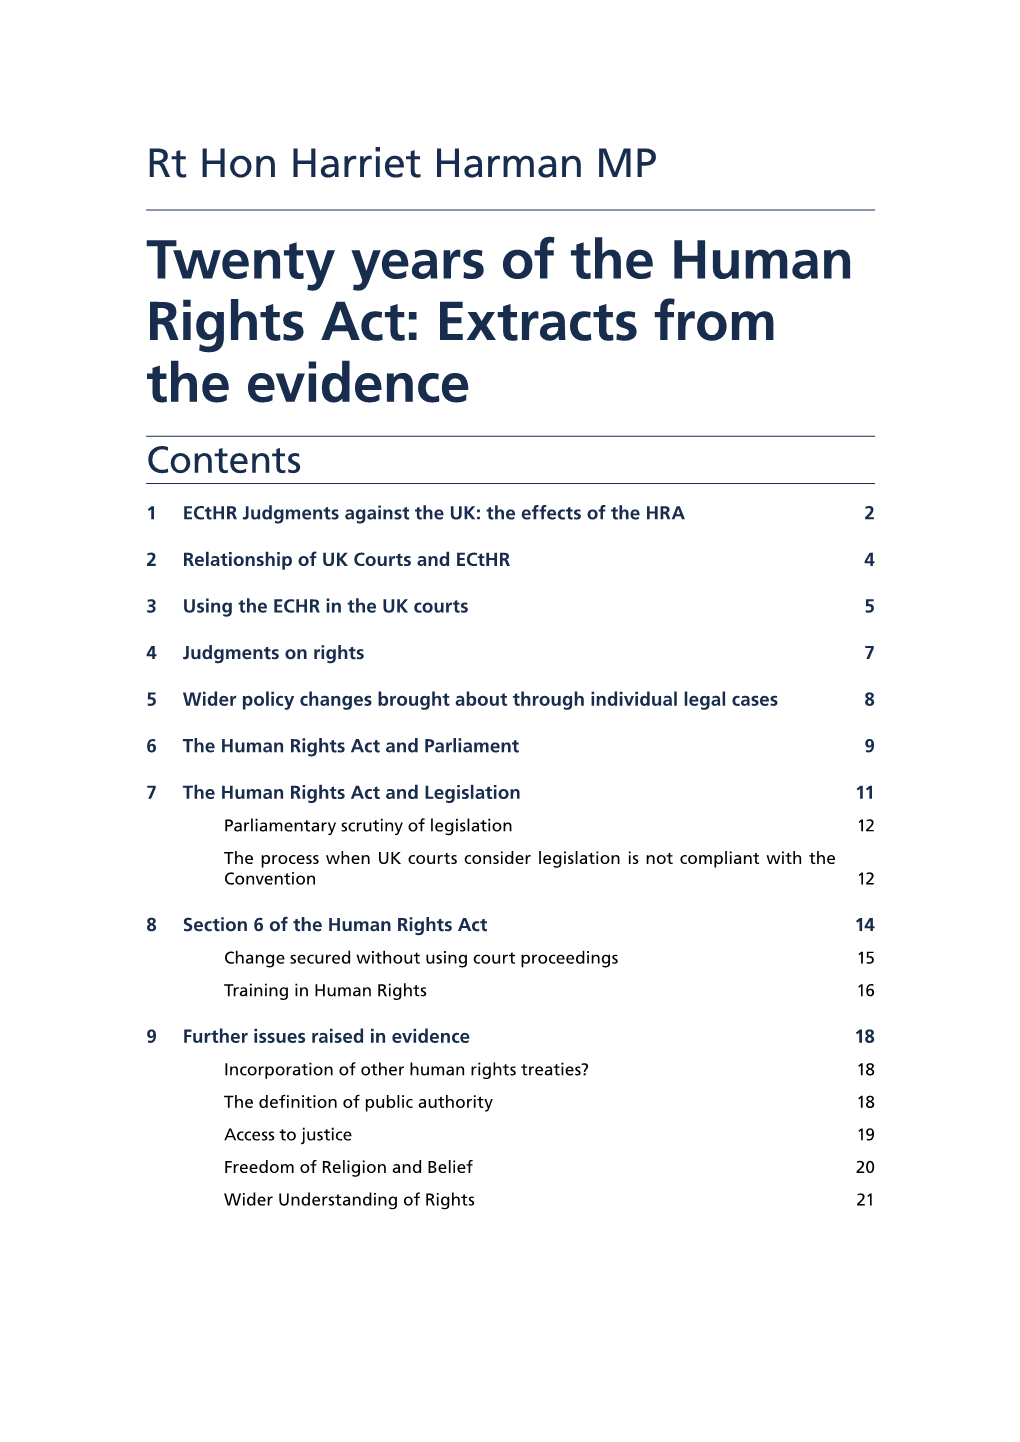 Twenty Years of the Human Rights Act: Extracts from the Evidence Contents